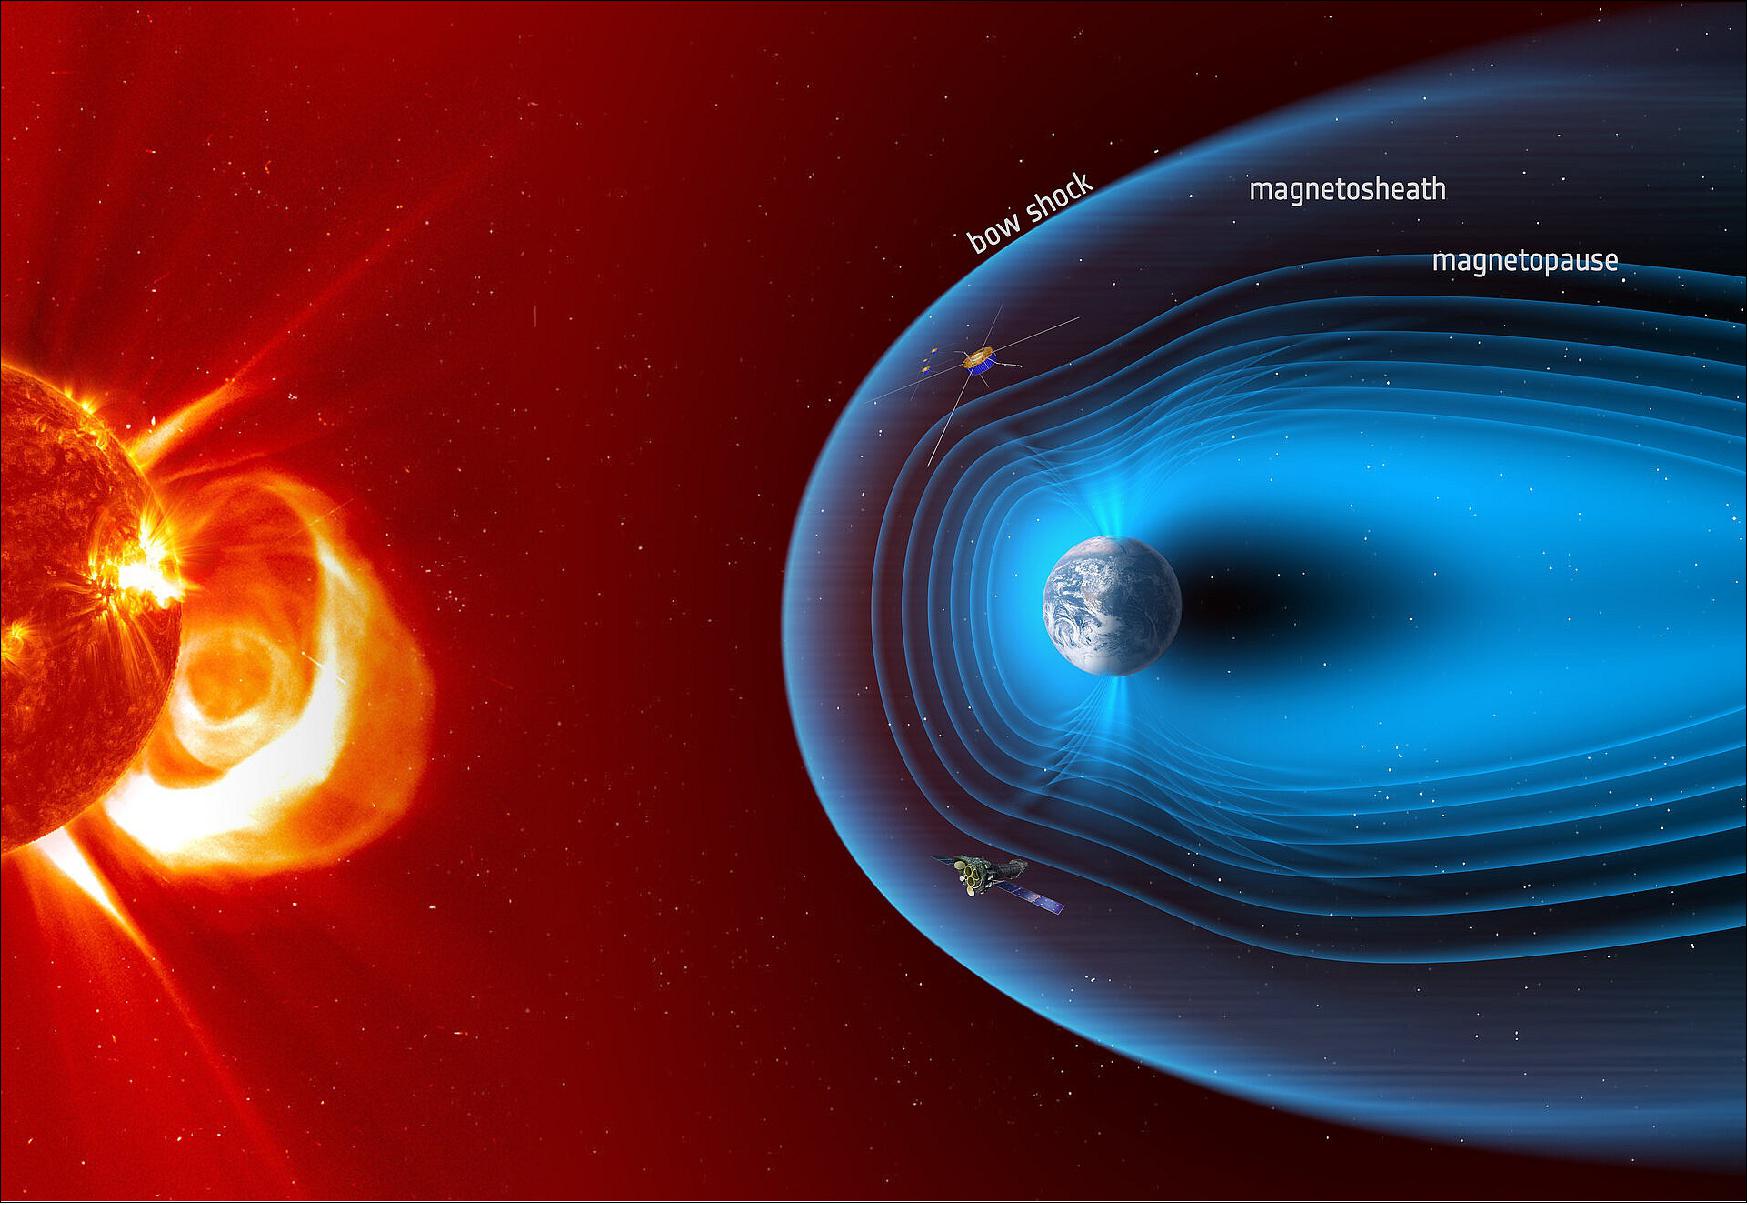 Figure 10: Illustration of Cluster and XMM-Newton observing Earth's magnetosphere, with several key regions indicated. By combining data from both XMM-Newton and Cluster, scientists have been studying Earth's magnetosphere to pave the way for the upcoming Solar wind-Magnetosphere-Ionosphere Link Explorer, or Smile, a joint European-Chinese mission (image credit: ESA/ATG medialab)